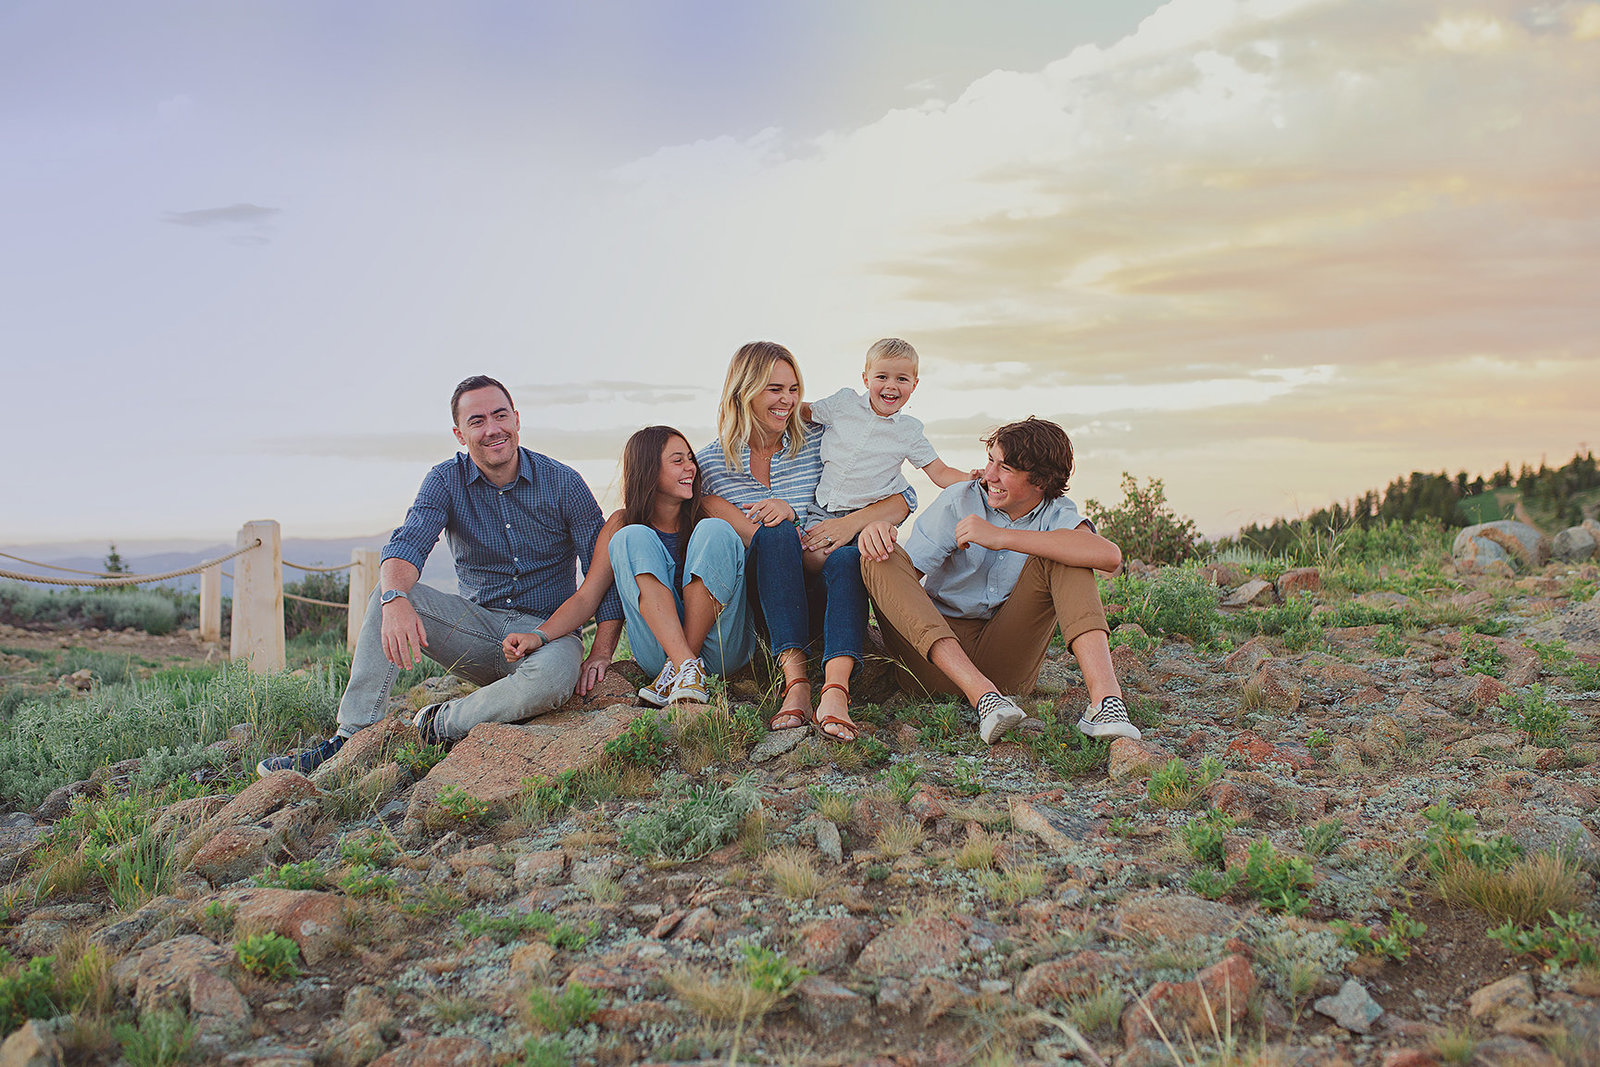 Wendy Parrish Photography is a Missoula family photographer specializing in newborn, maternity, family and seniors serving Missoula, Great Falls, The Bitterroot Valley and the surrounding areas.